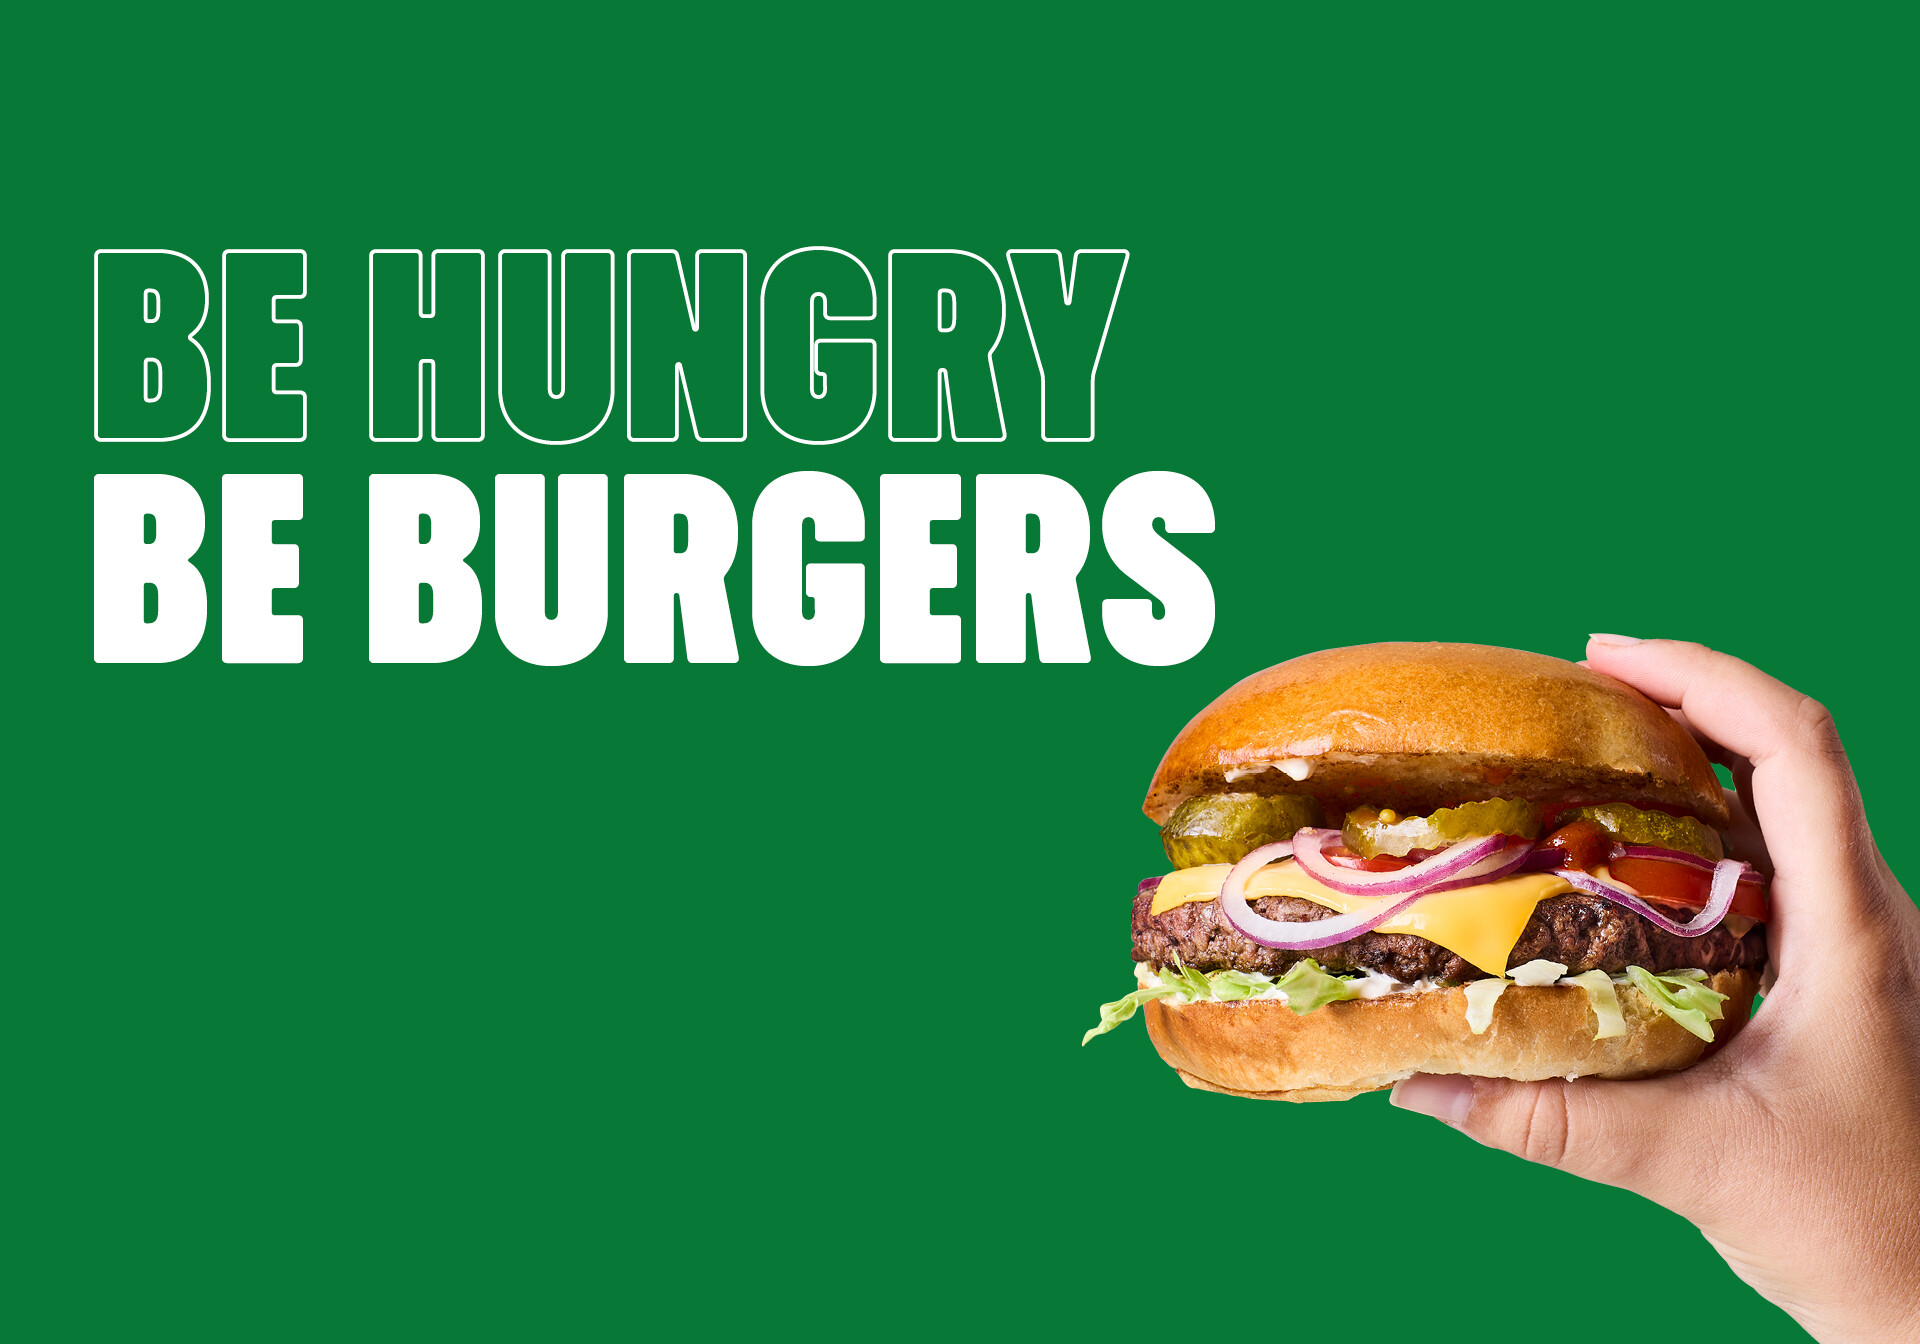 Be burgers banner